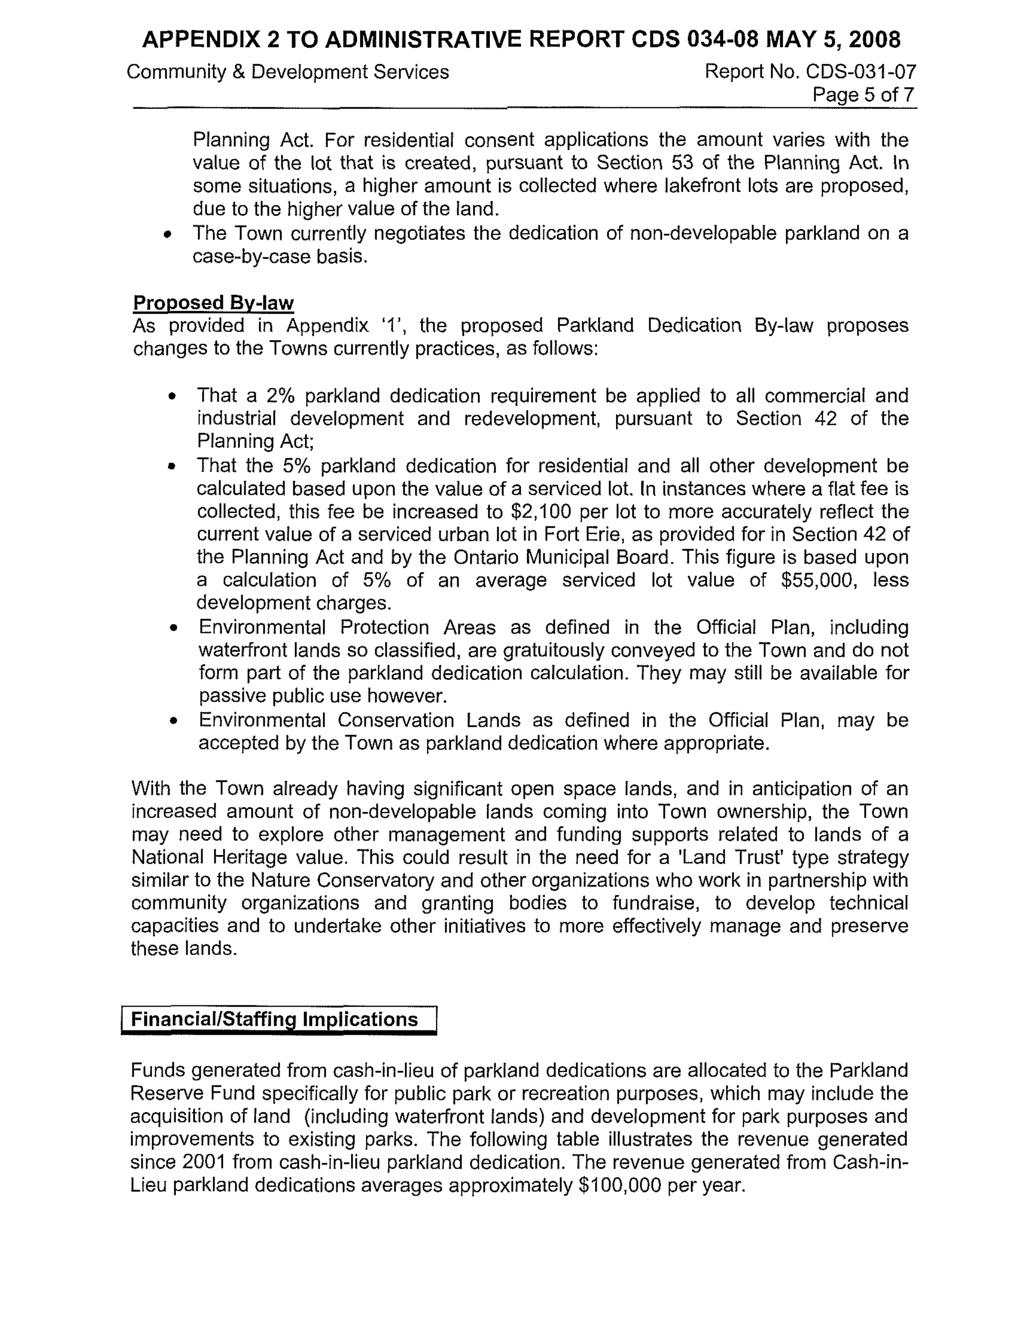 APPENDIX 2 TO ADMINISTRATIVE REPORT CDS 034-08 MAY 5,2008 Community & Development Services Report No. CDS-031-07 Page 5 of 7 Planning Act.